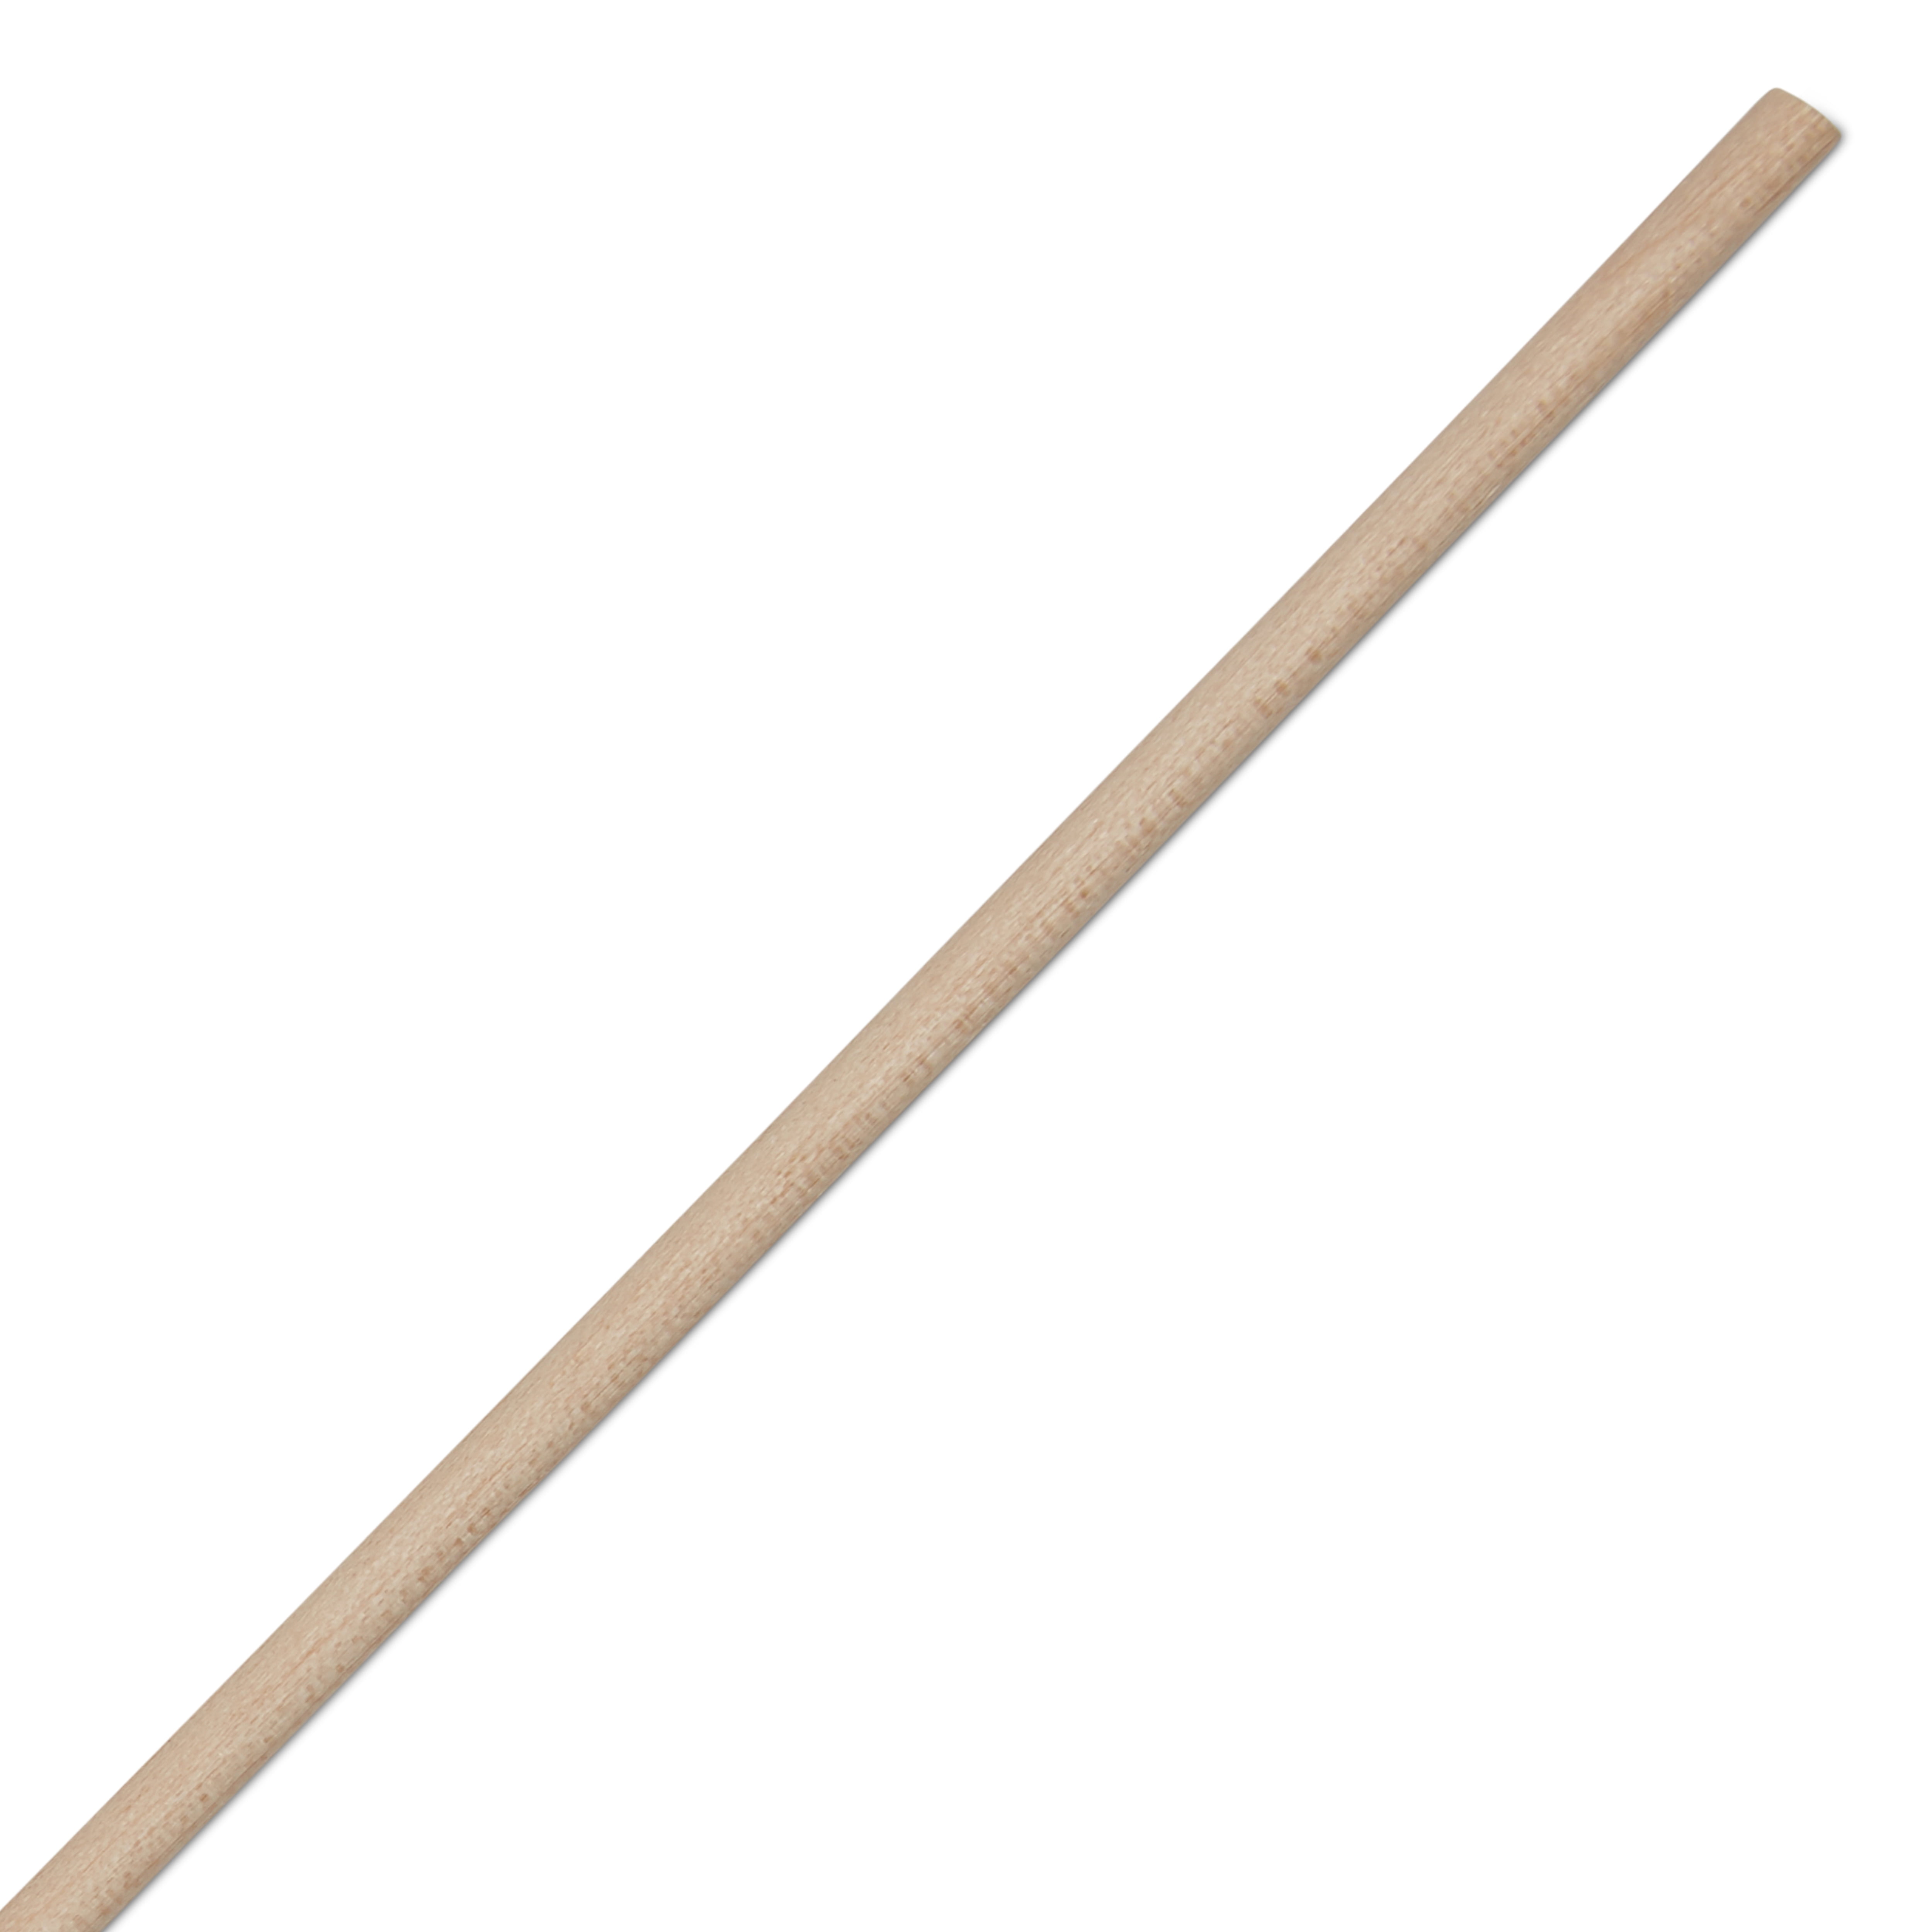 Dowel Rods Wood Sticks Wooden Dowel Rods - 1/4 x 24 Inch Unfinished  Hardwood Sticks - for Crafts and DIYers - 250 Pieces by Woodpeckers